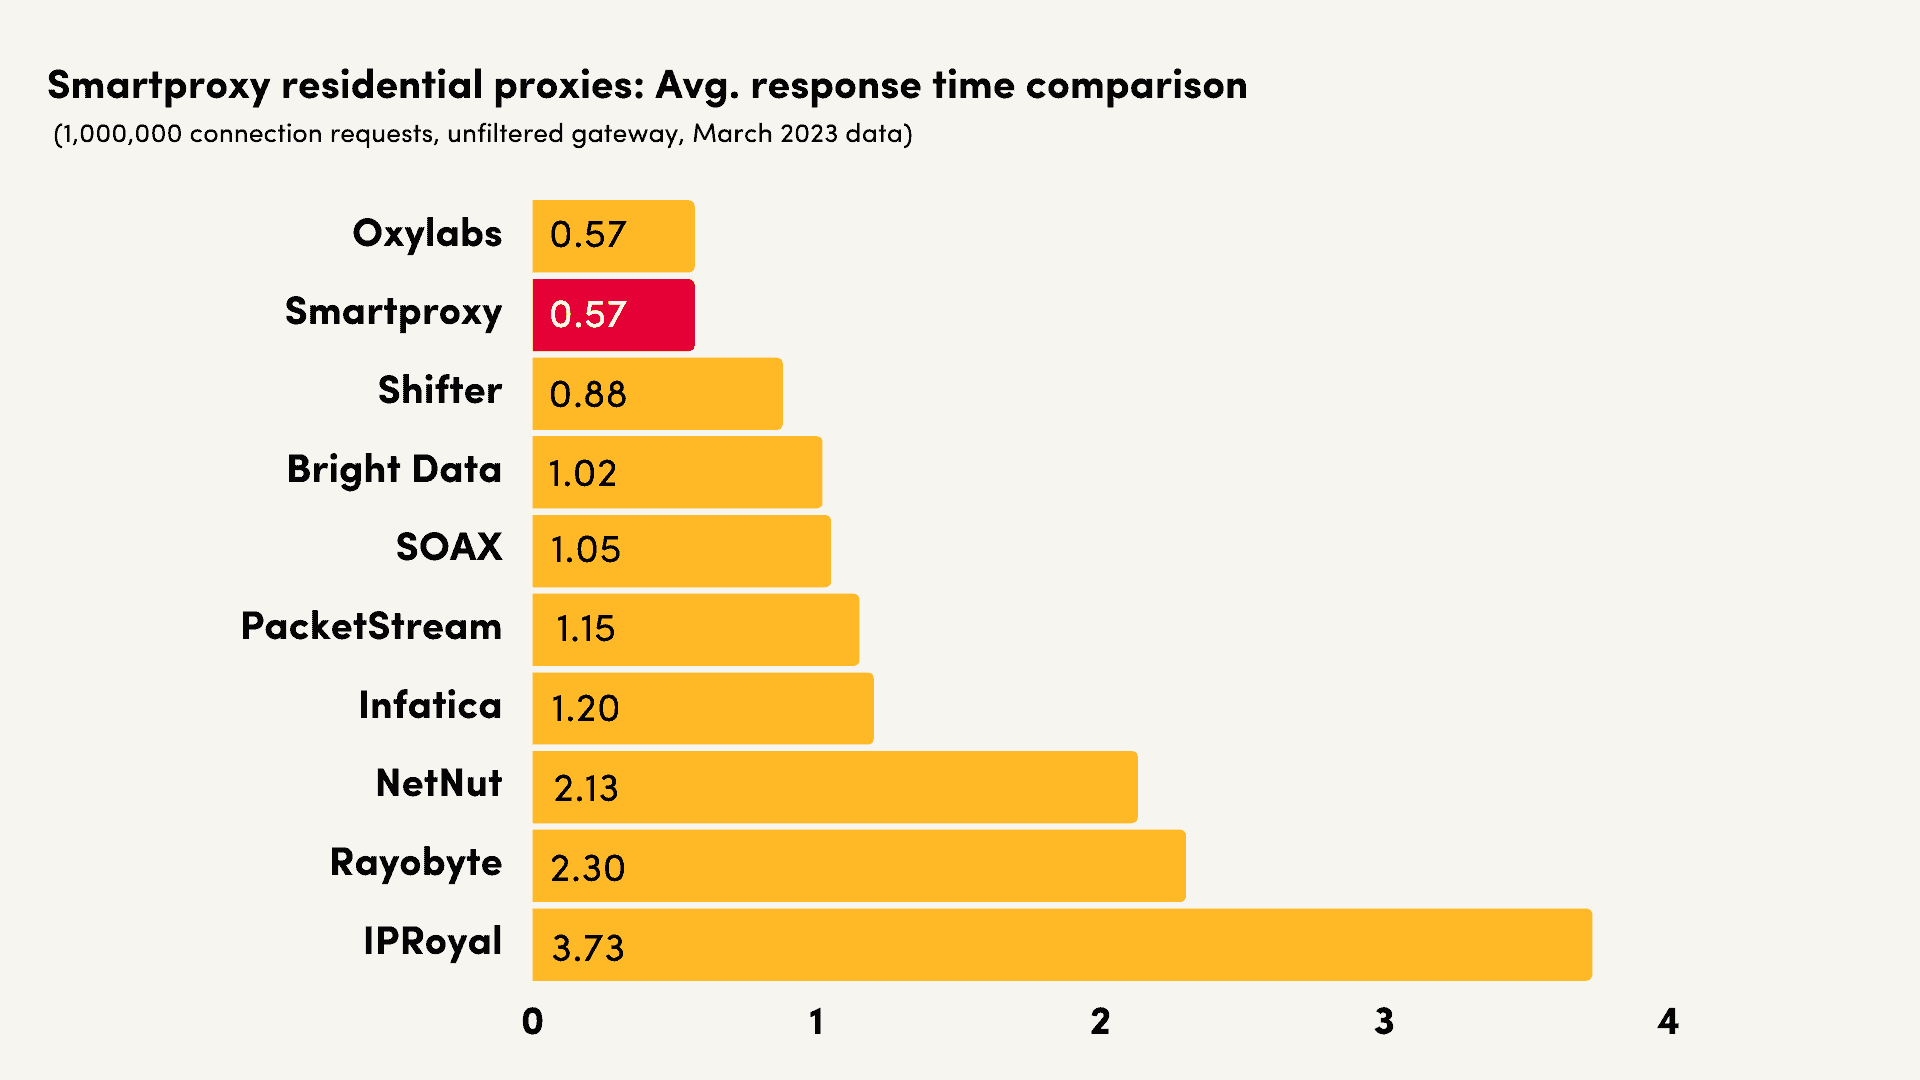 smartproxy residential proxy response time comparison with other providers march 2023